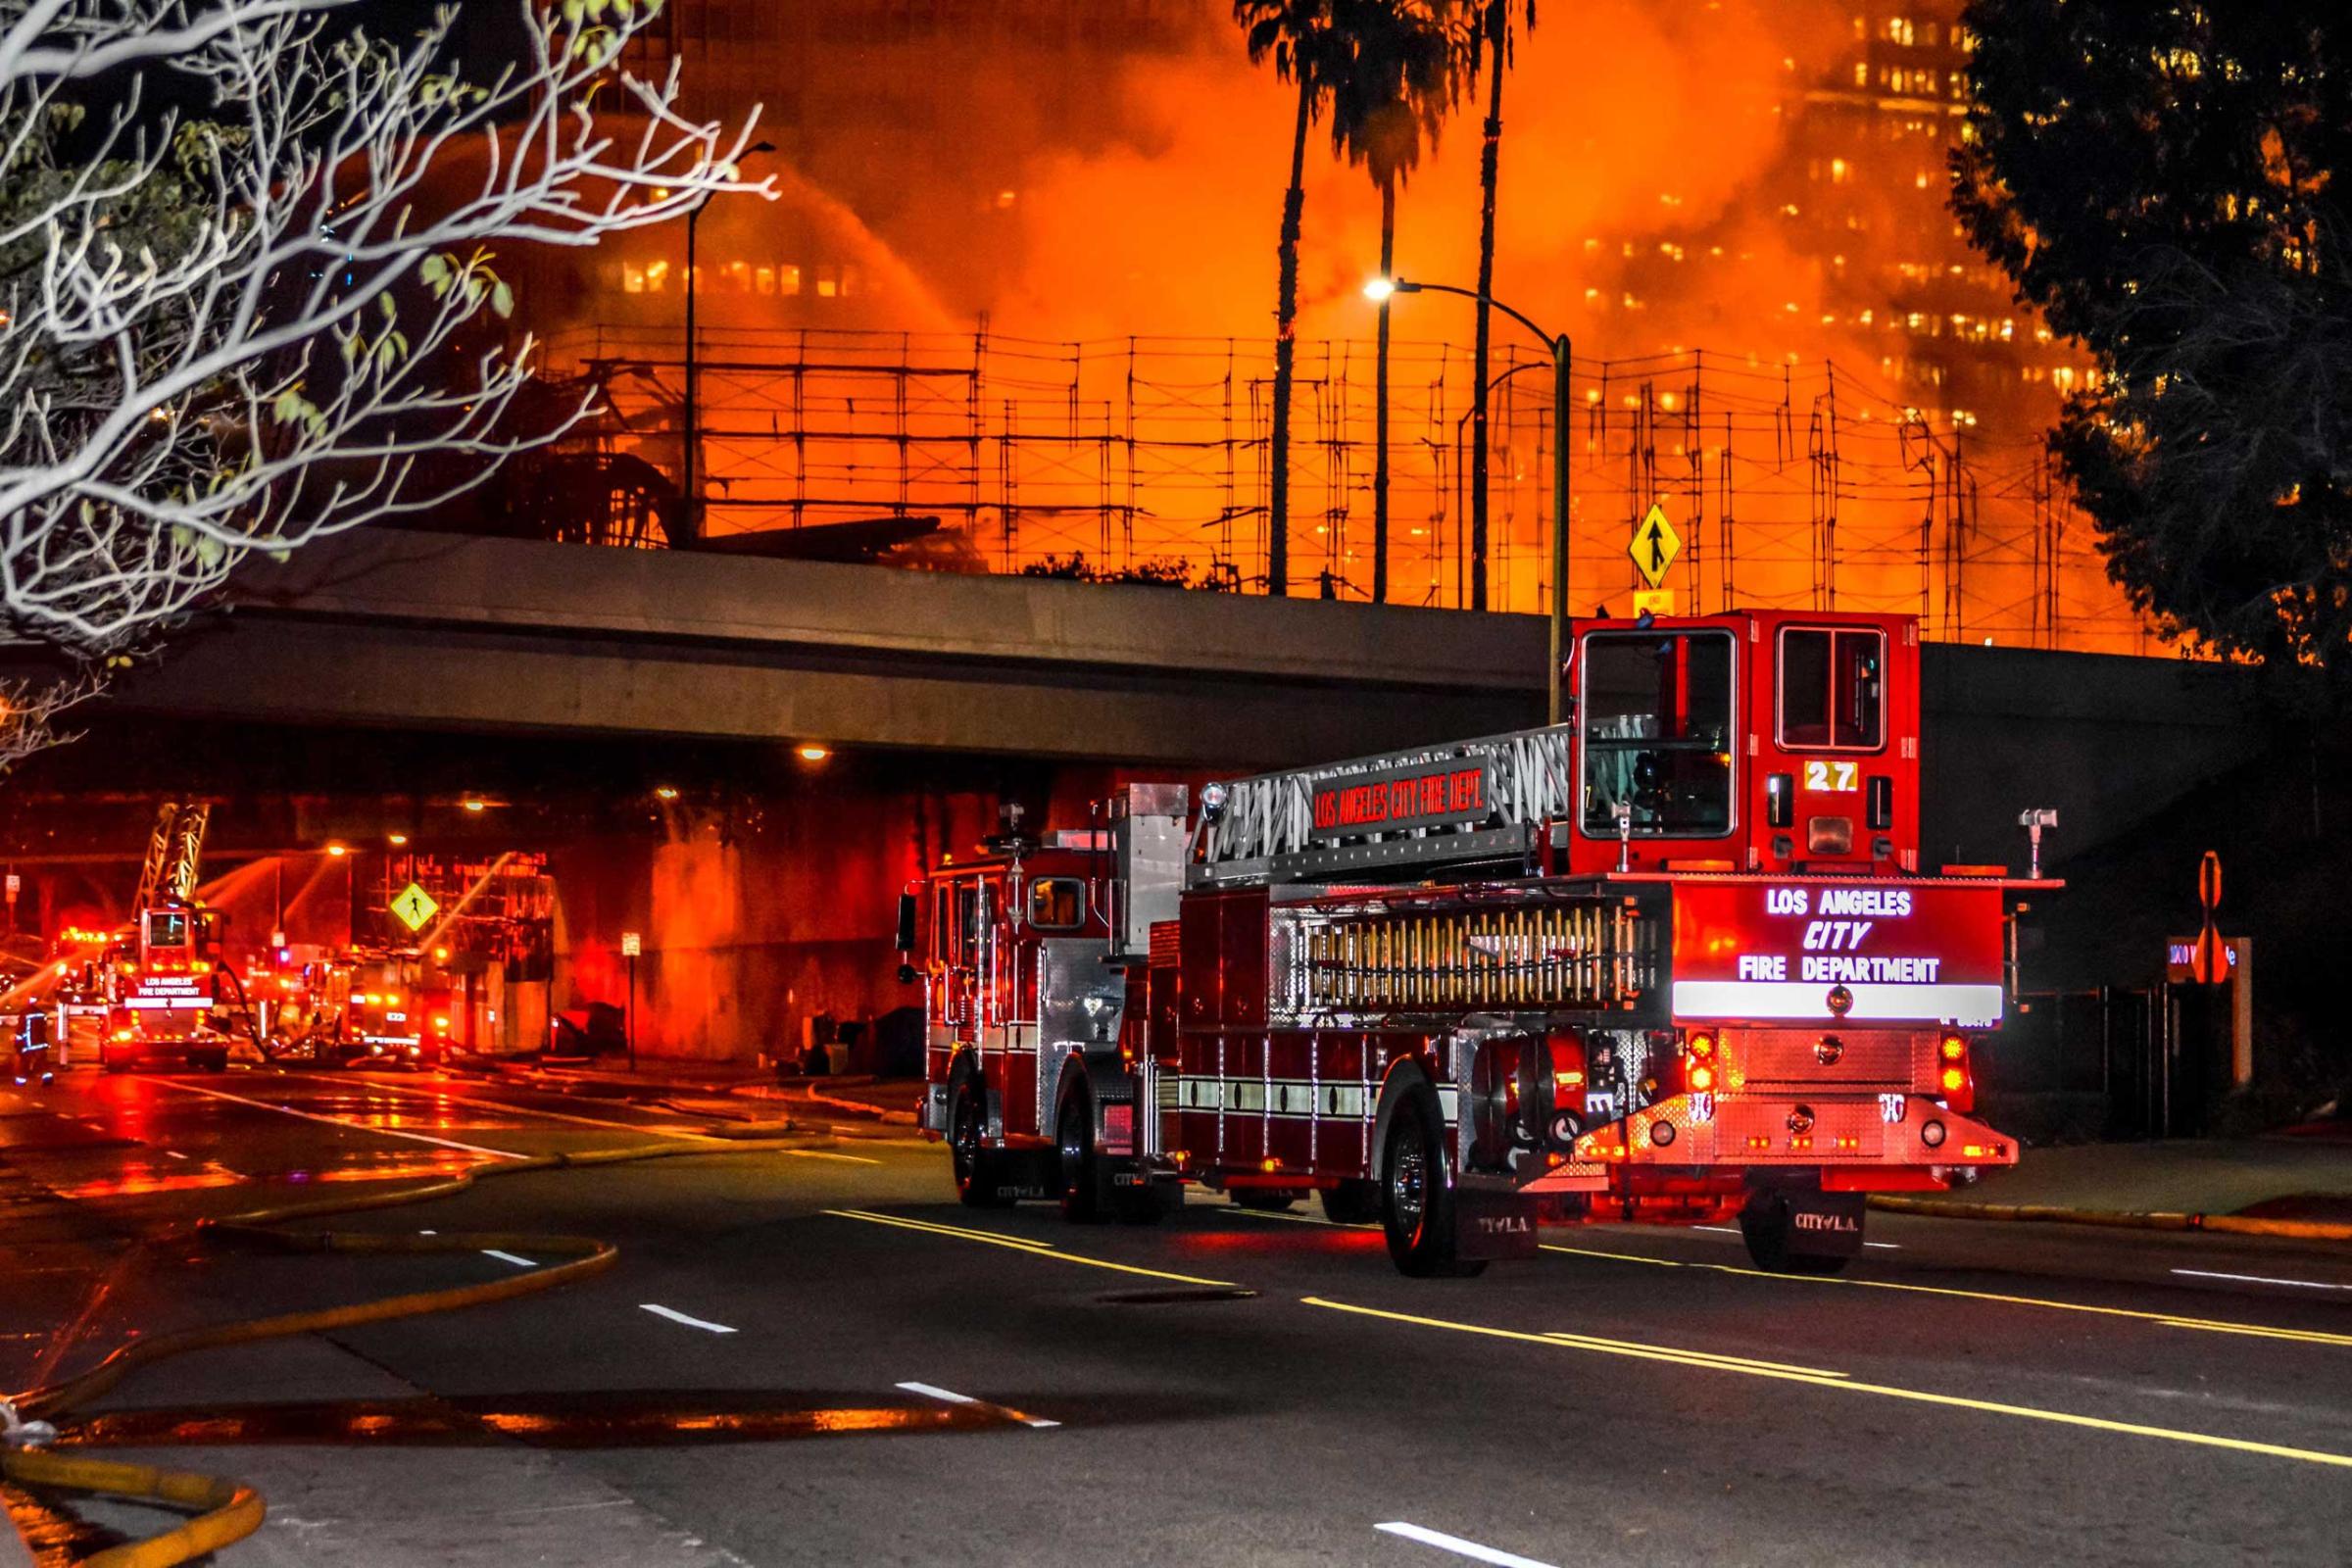 Los Angeles CA, USA 08 Dec 2014 Firefighters at a large apartment building fire in downtown Los Angeles which shut down major freeways. © Chester Brown/Alamy Live News